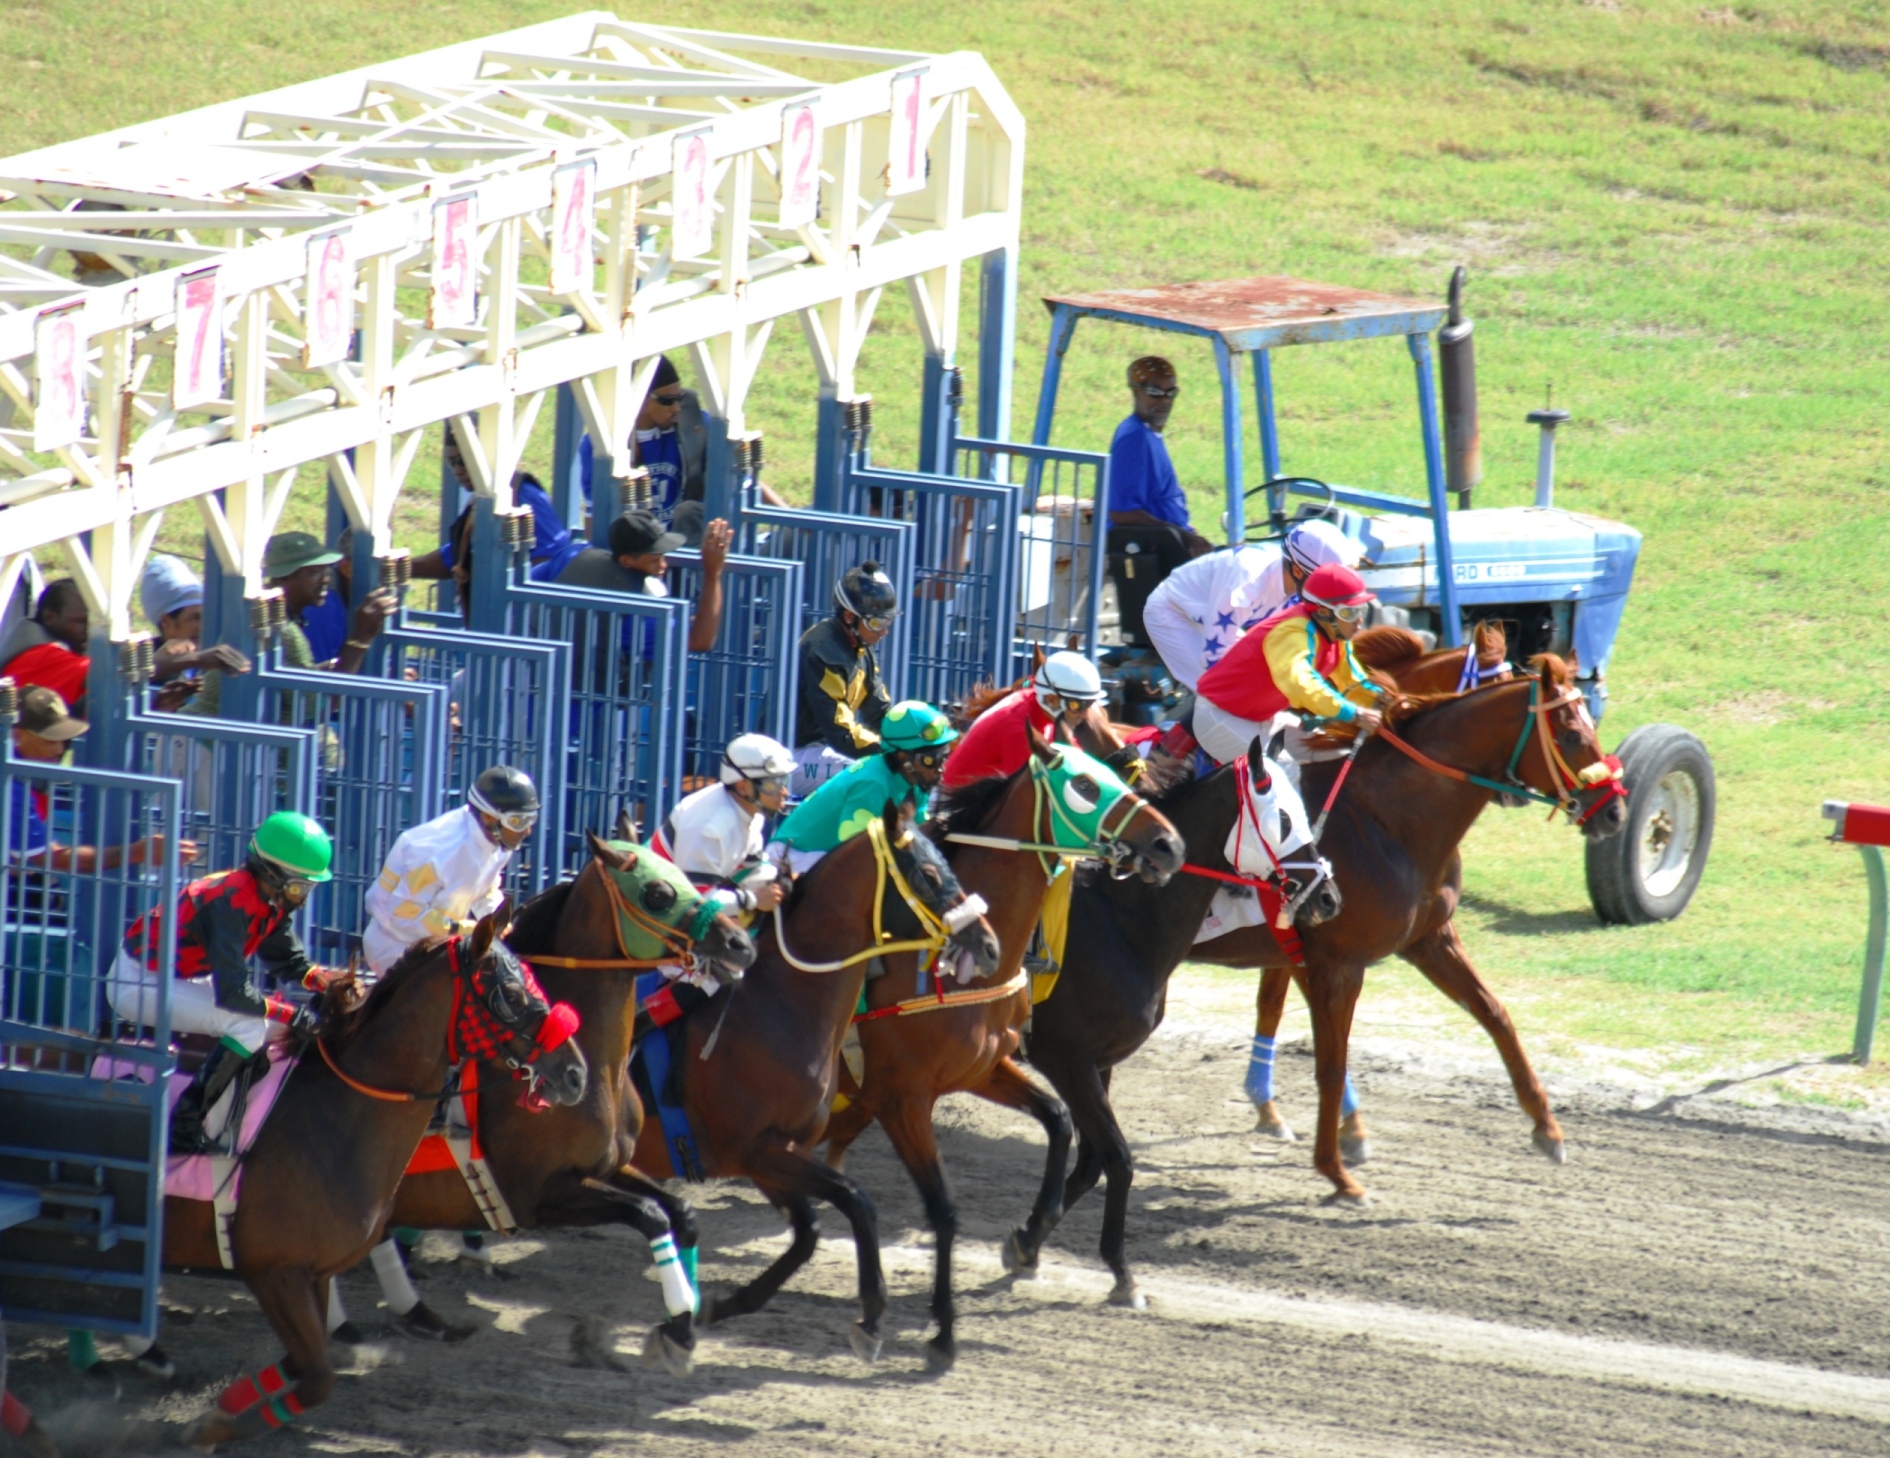 The horses broke alertly from the gates at the Randall "Doc" James Racetrack on Sunday.